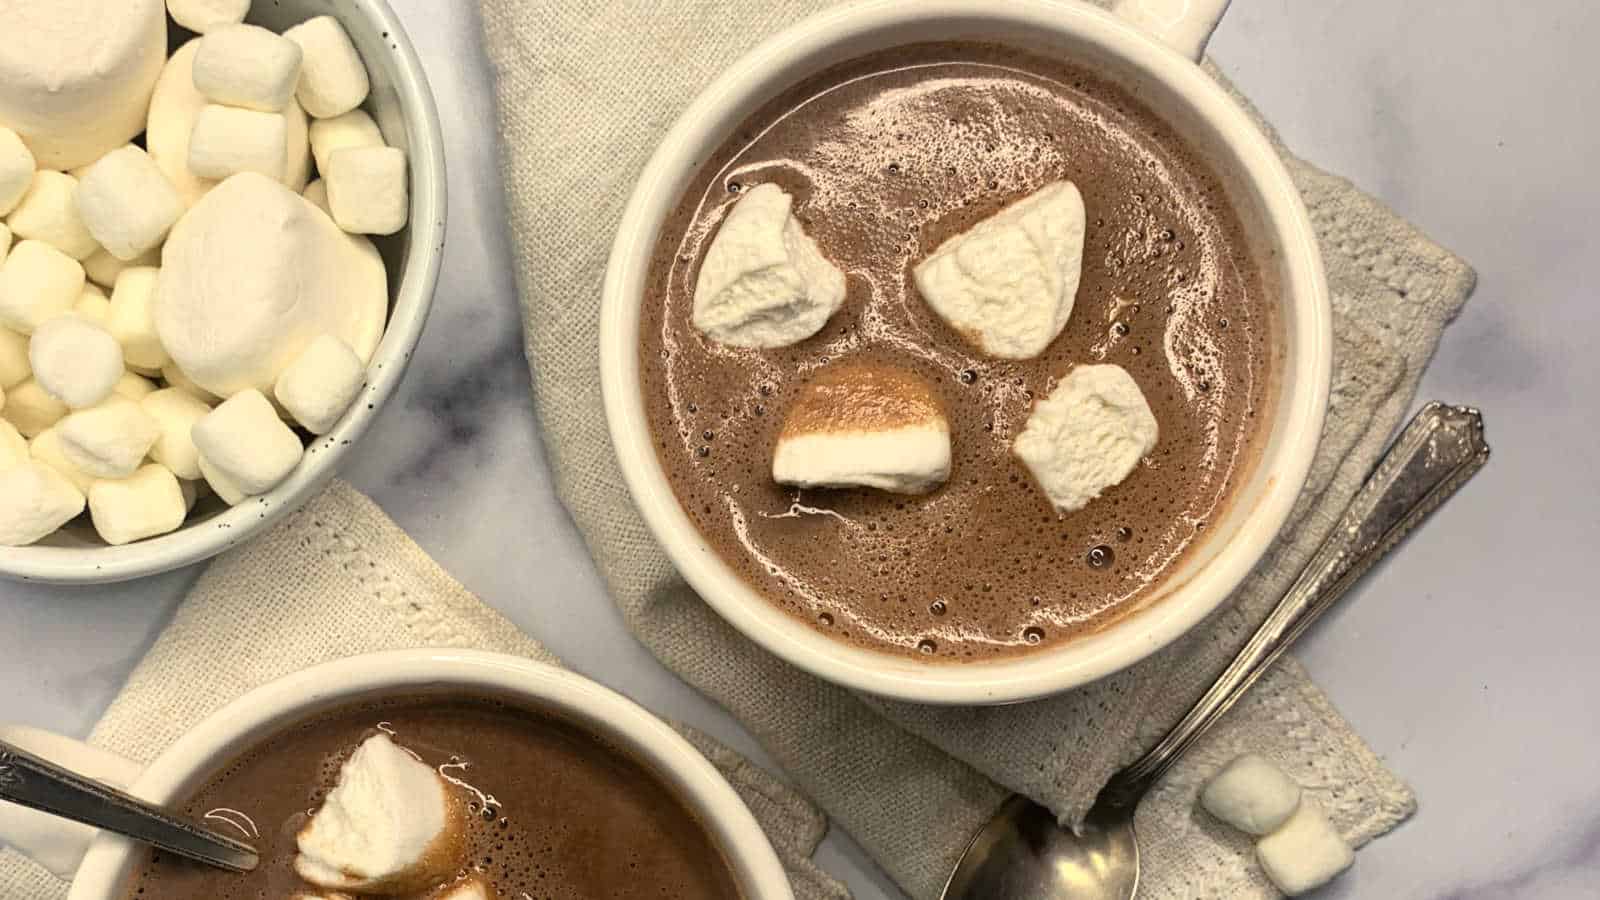 Two bowls of hot chocolate with marshmallows on top.